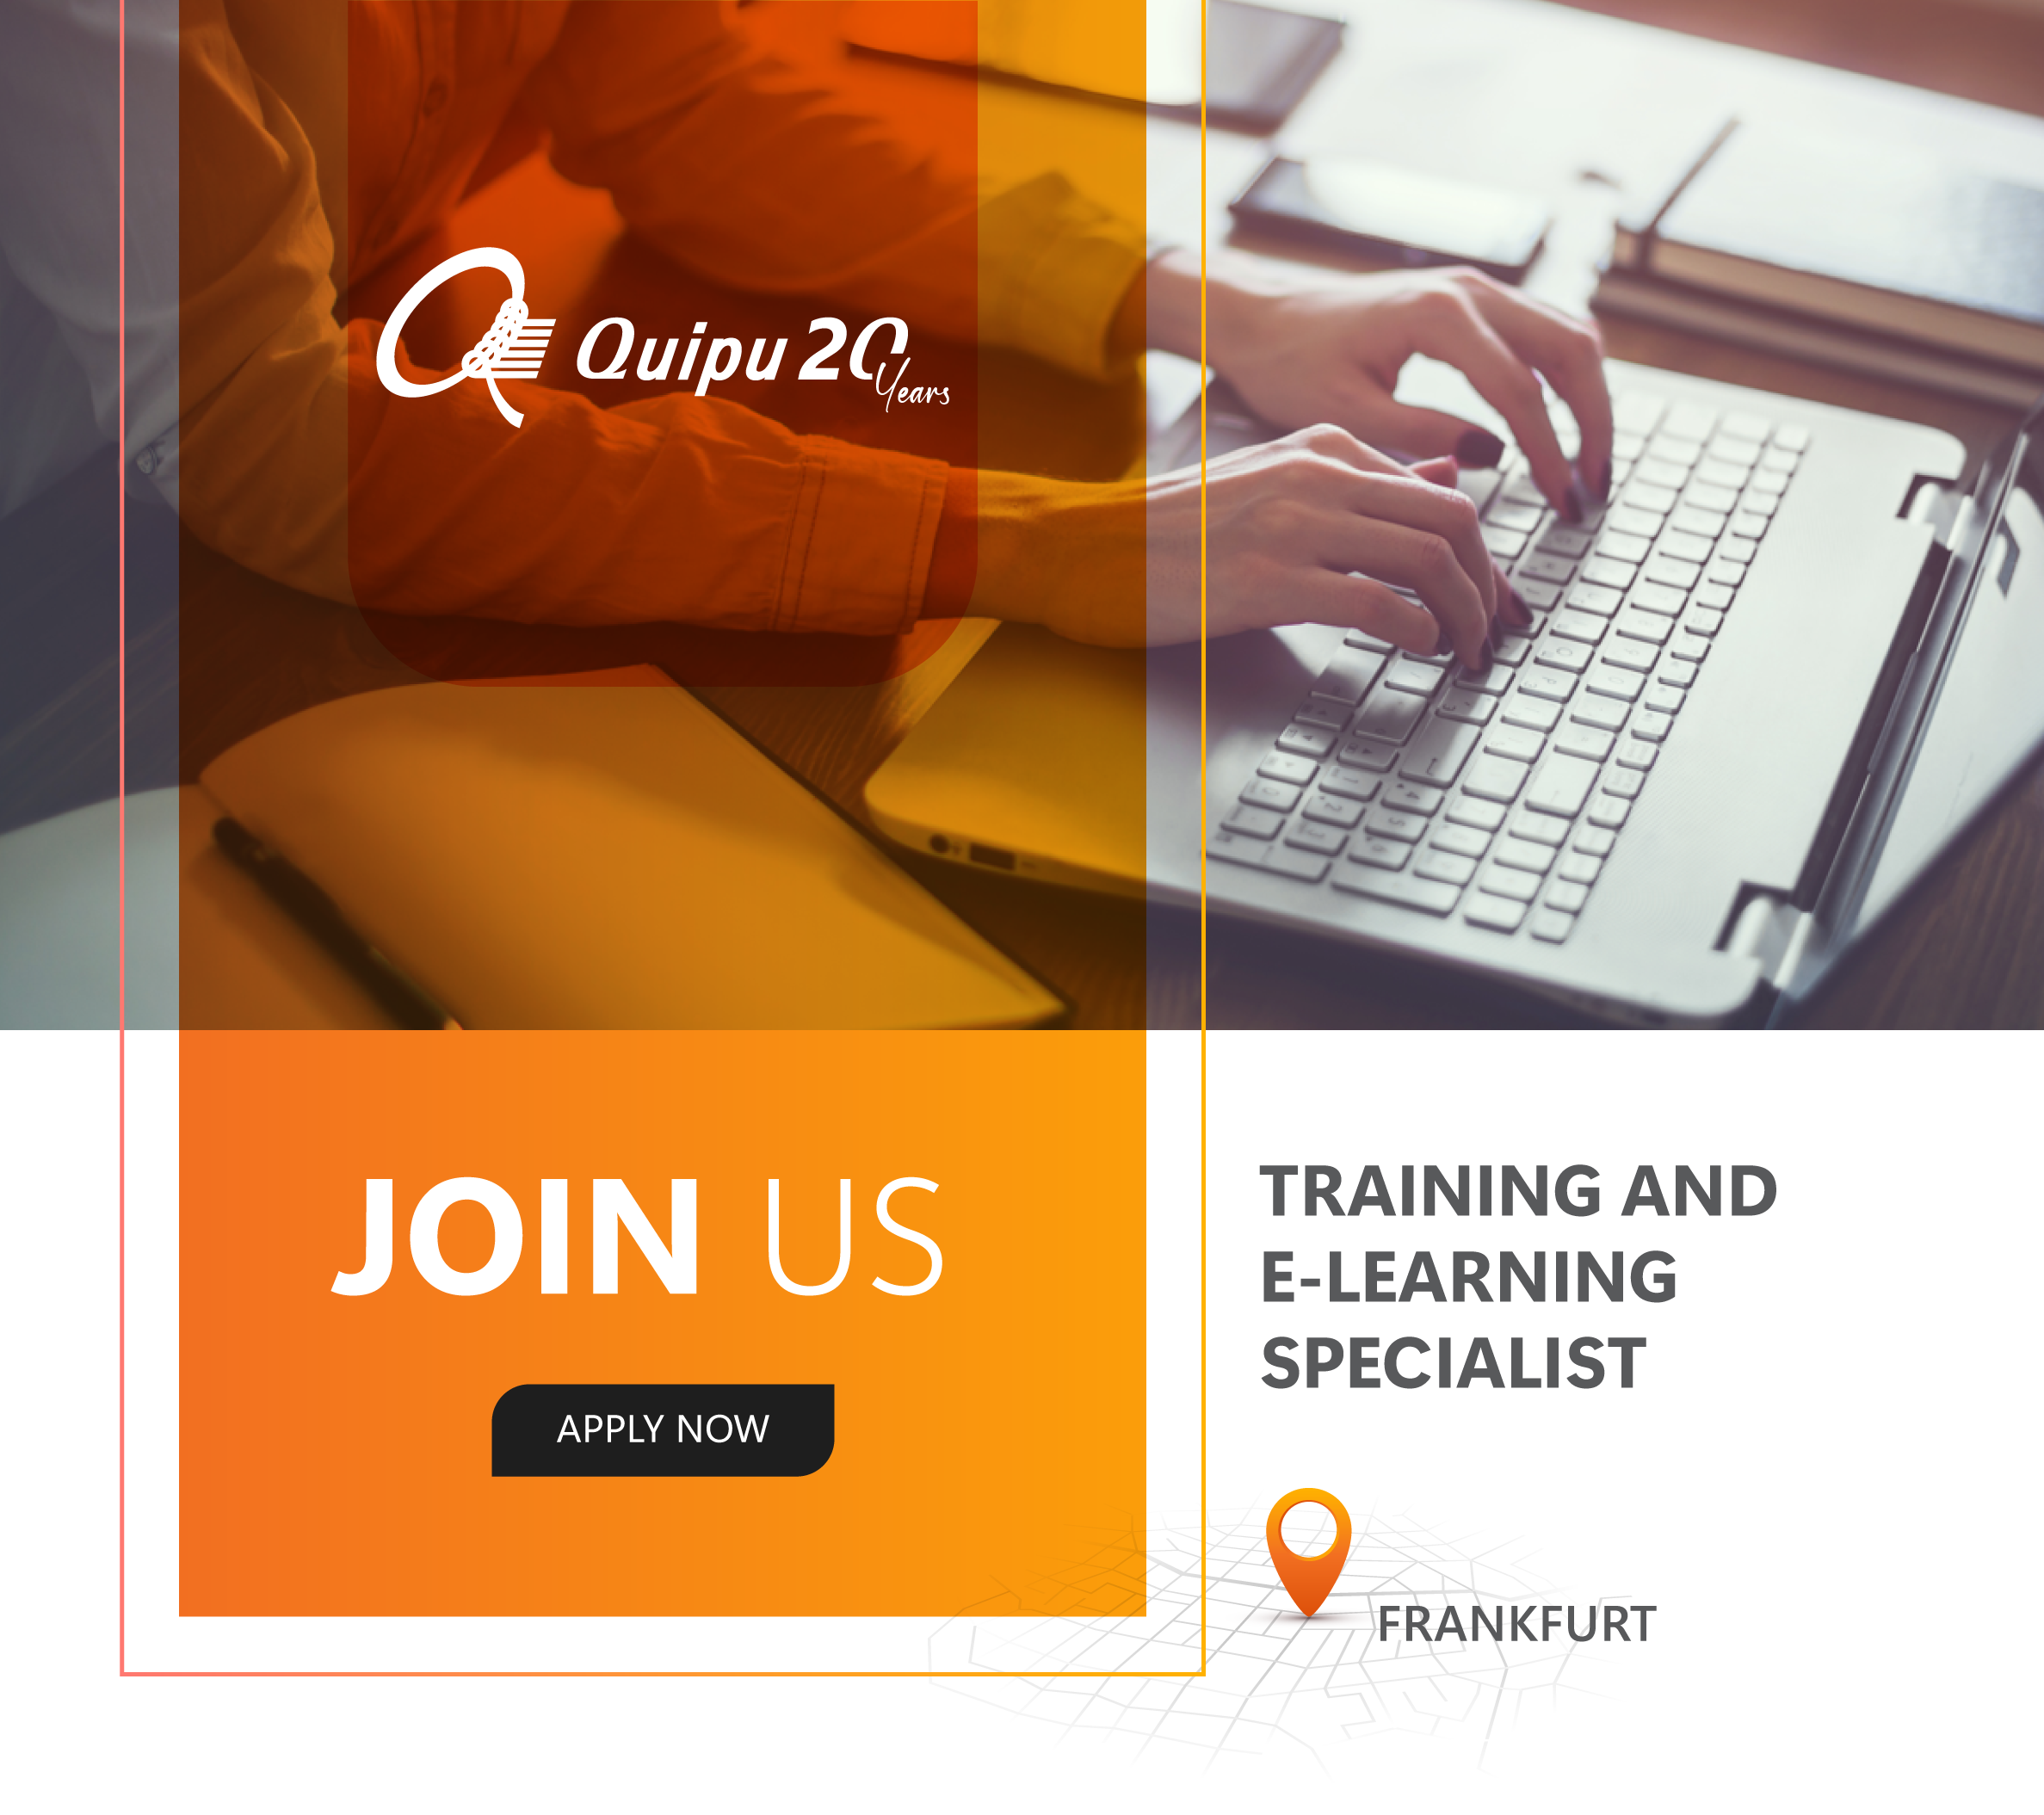 Training And E-Learning Specialist – Frankfurt